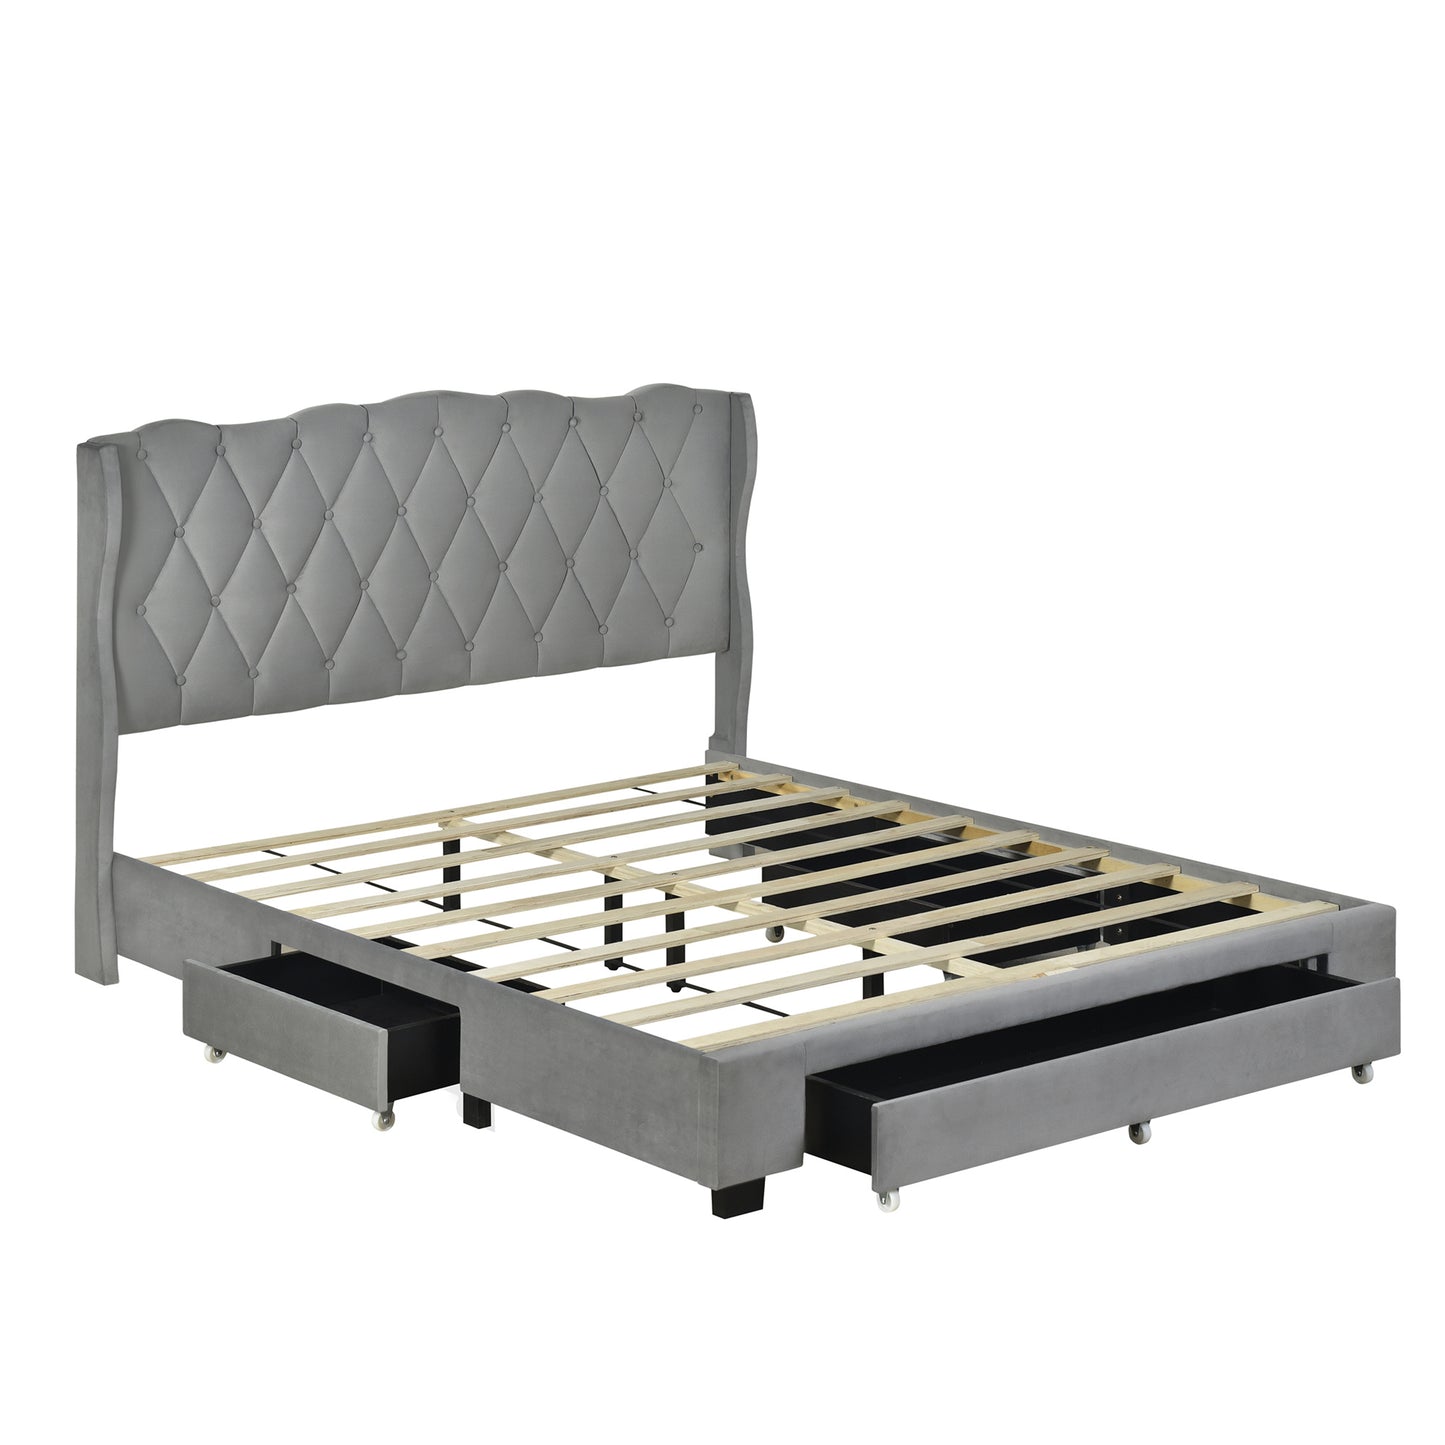 velvet upholstered platform bed with tufted headboard and 3 drawers, gray